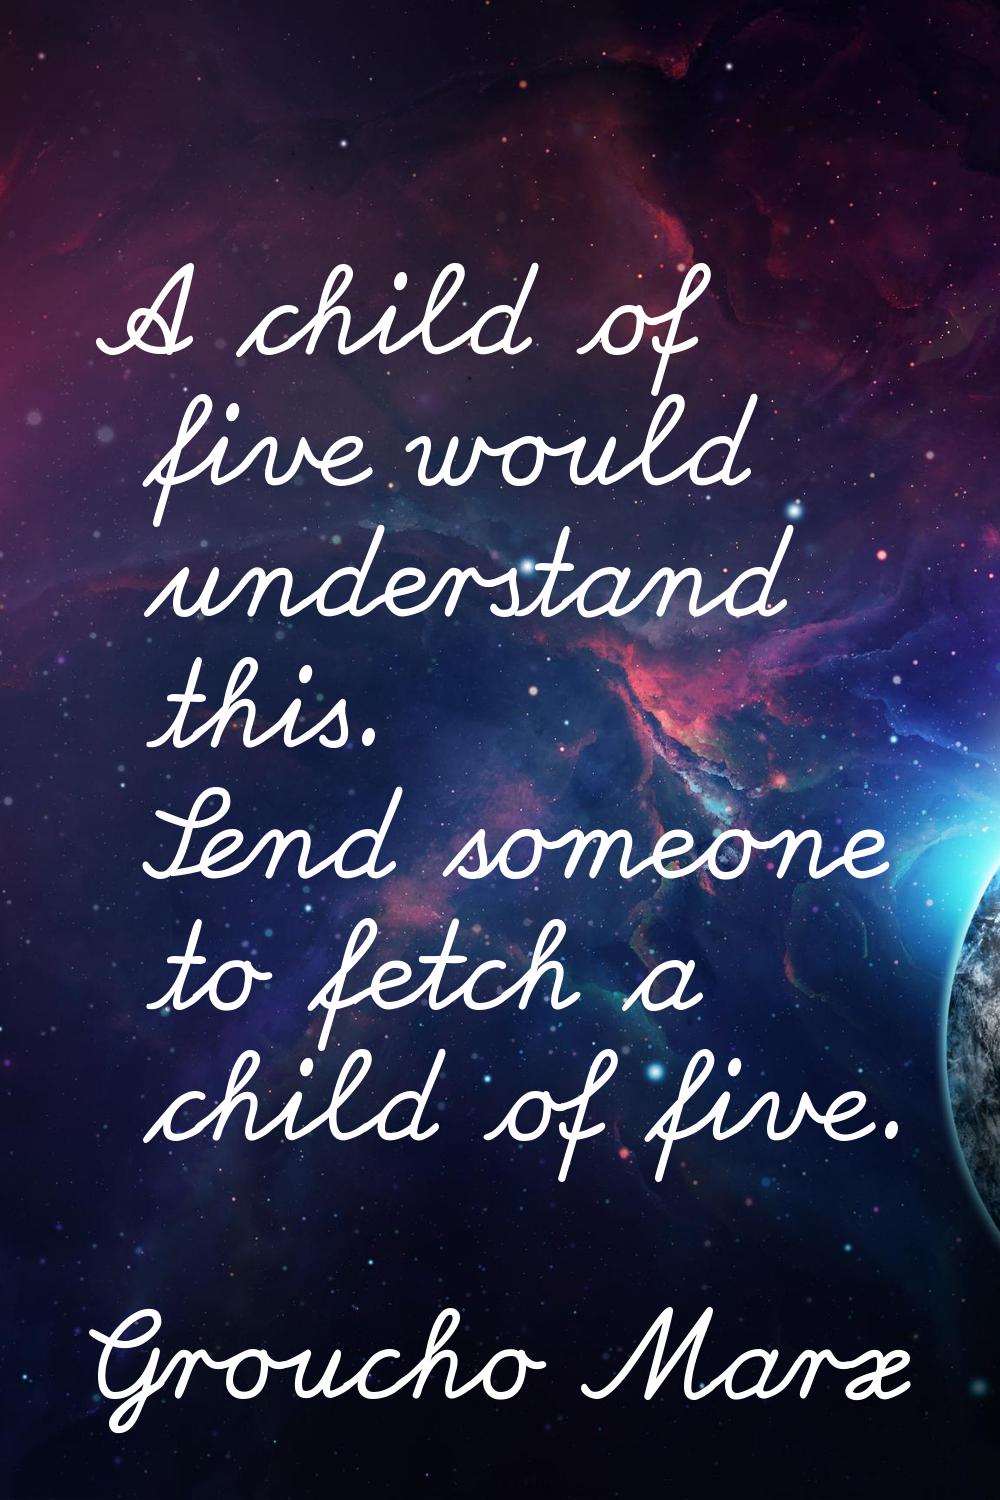 A child of five would understand this. Send someone to fetch a child of five.